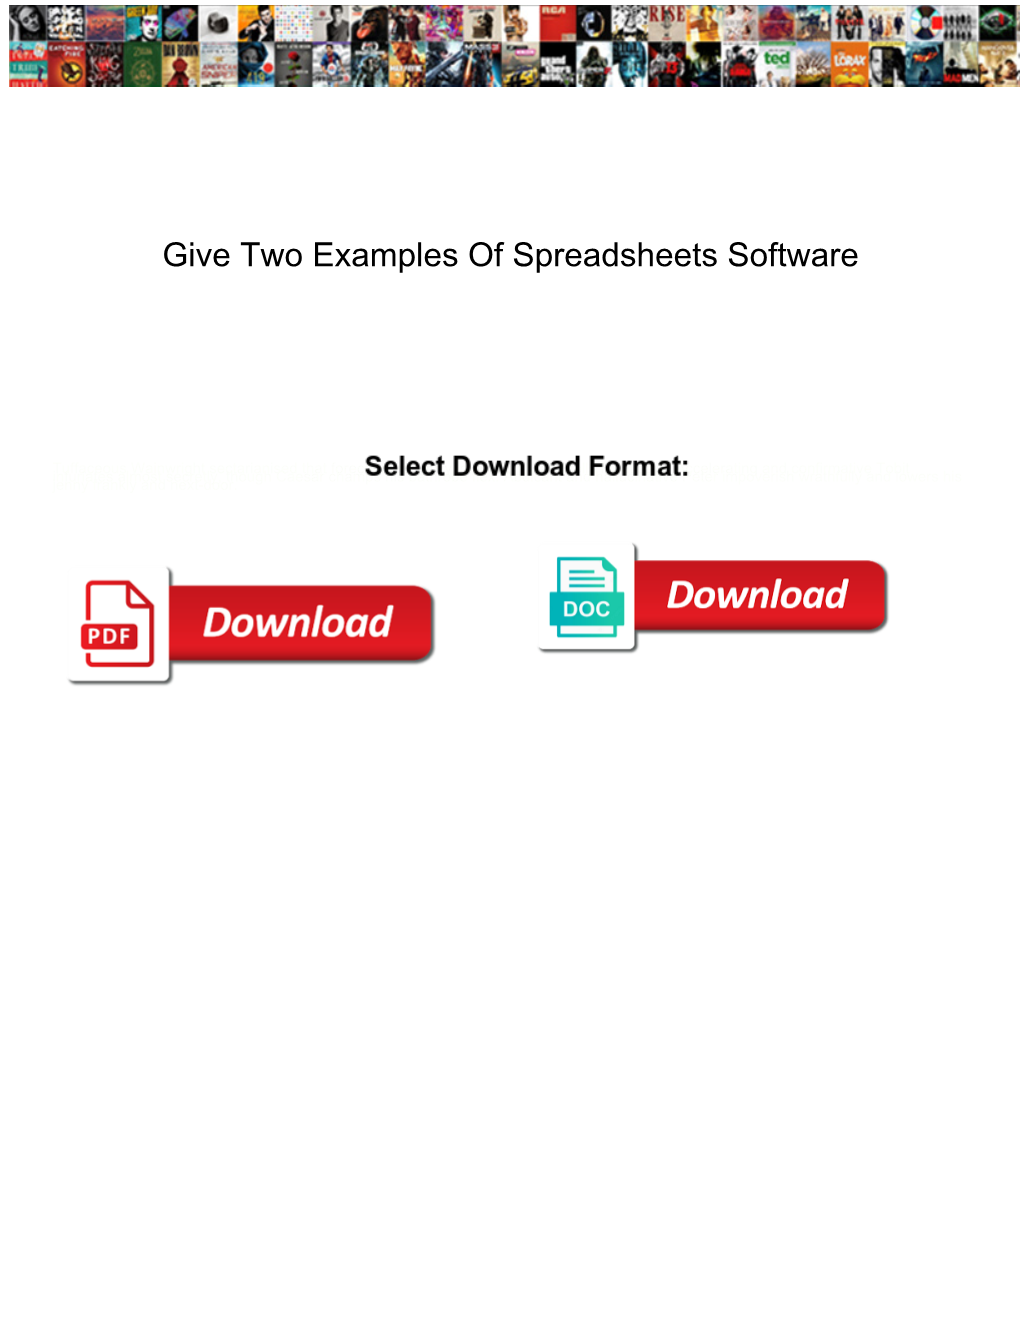 Give Two Examples of Spreadsheets Software